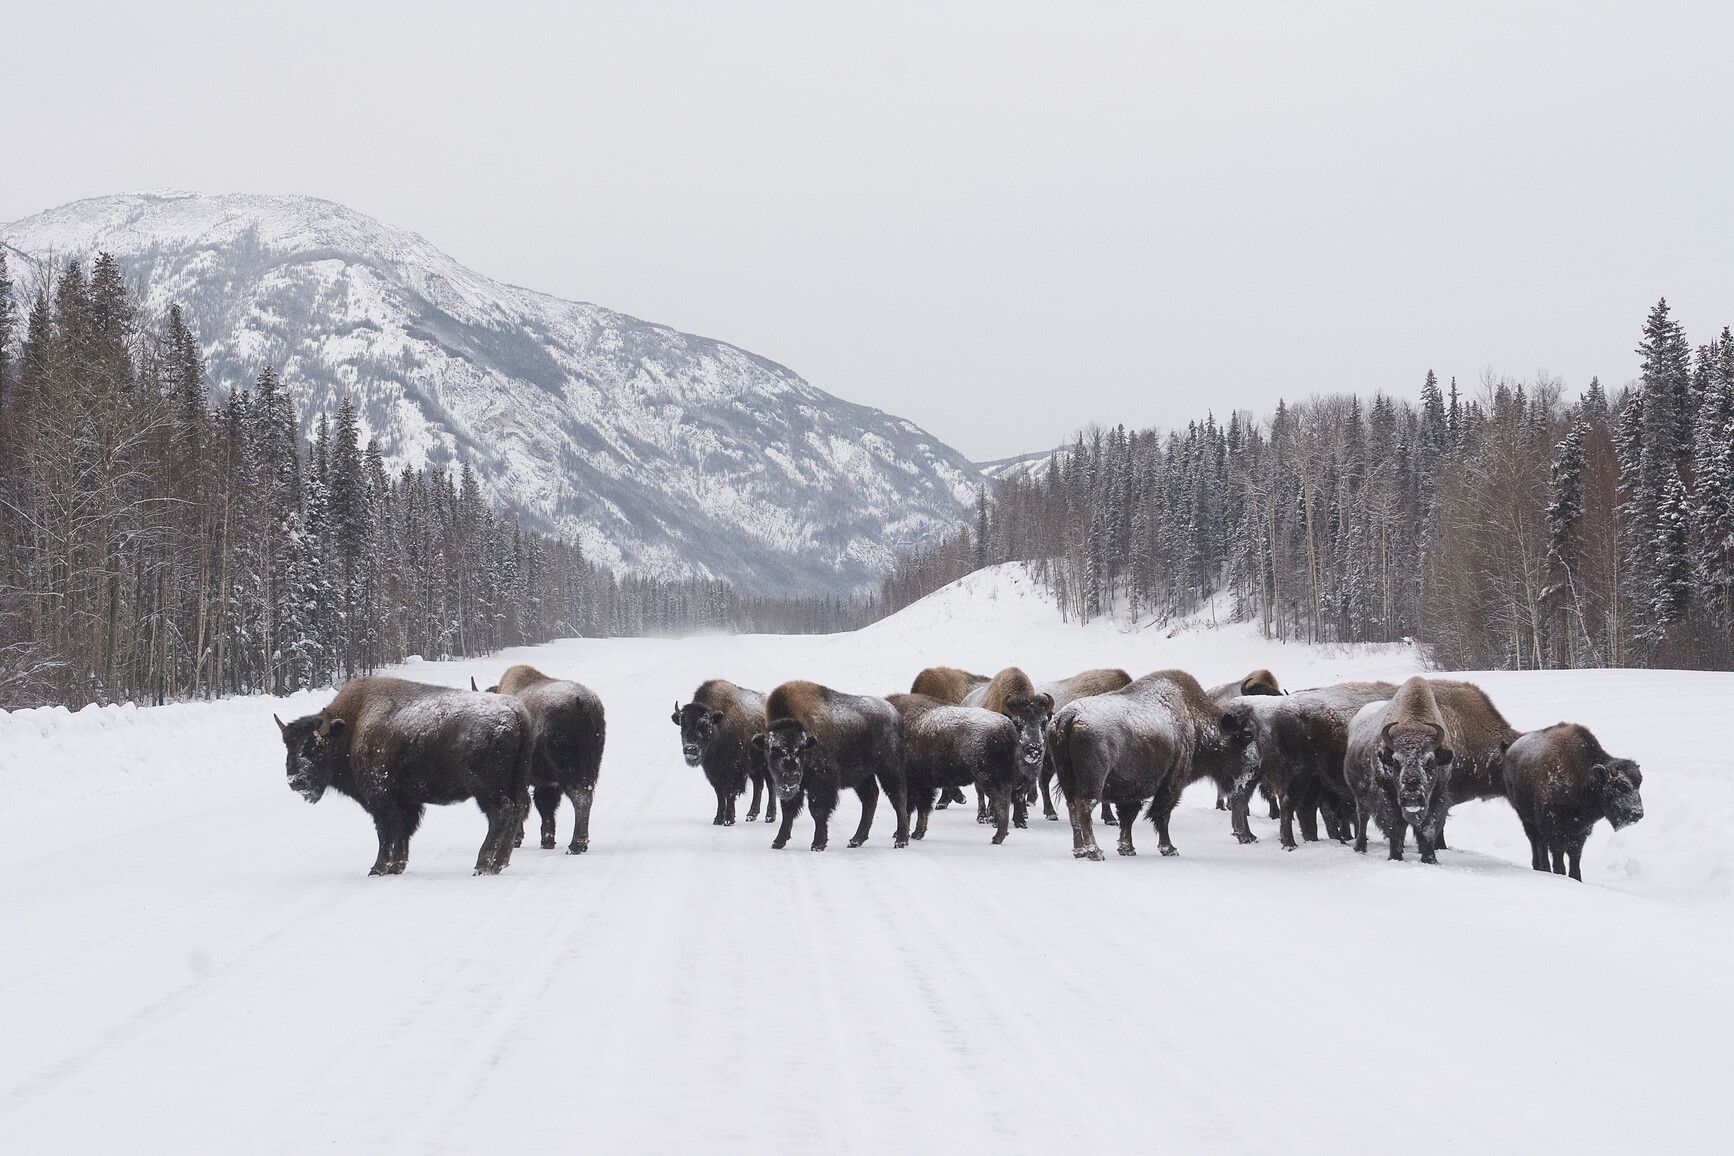 A herd of snow covered wood bison (bison athabascae) standing on the snowy highway. Liard River Hot Springs Park.